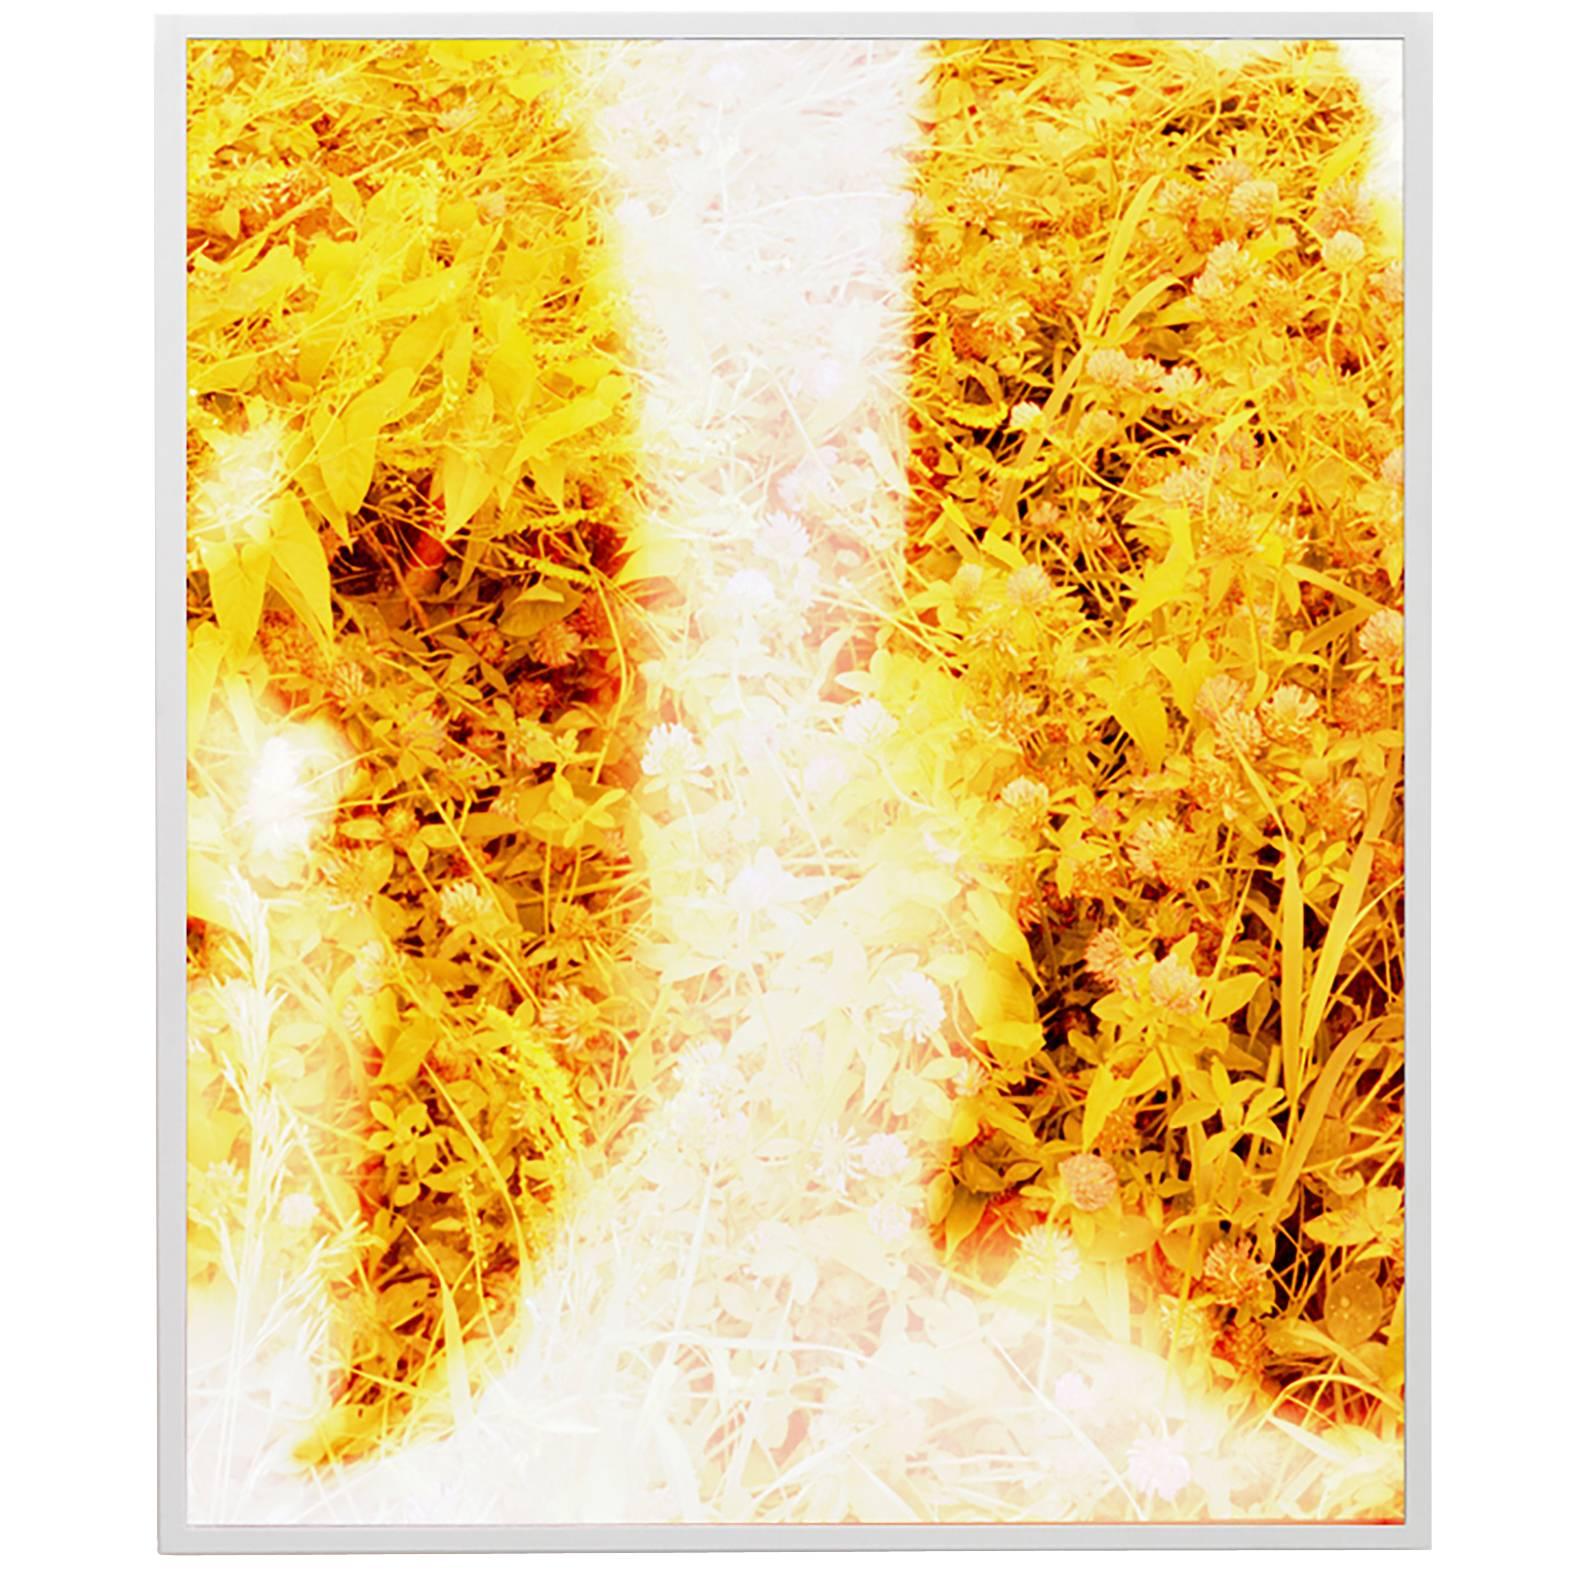 Archival pigment print edition of 3. Measures: 14″ x 11.5″.

Biography.
Tealia Ellis Ritter was born in Illinois and currently lives and works in rural Connecticut. Ellis Ritter views photography as an experimental process, utilizing varying